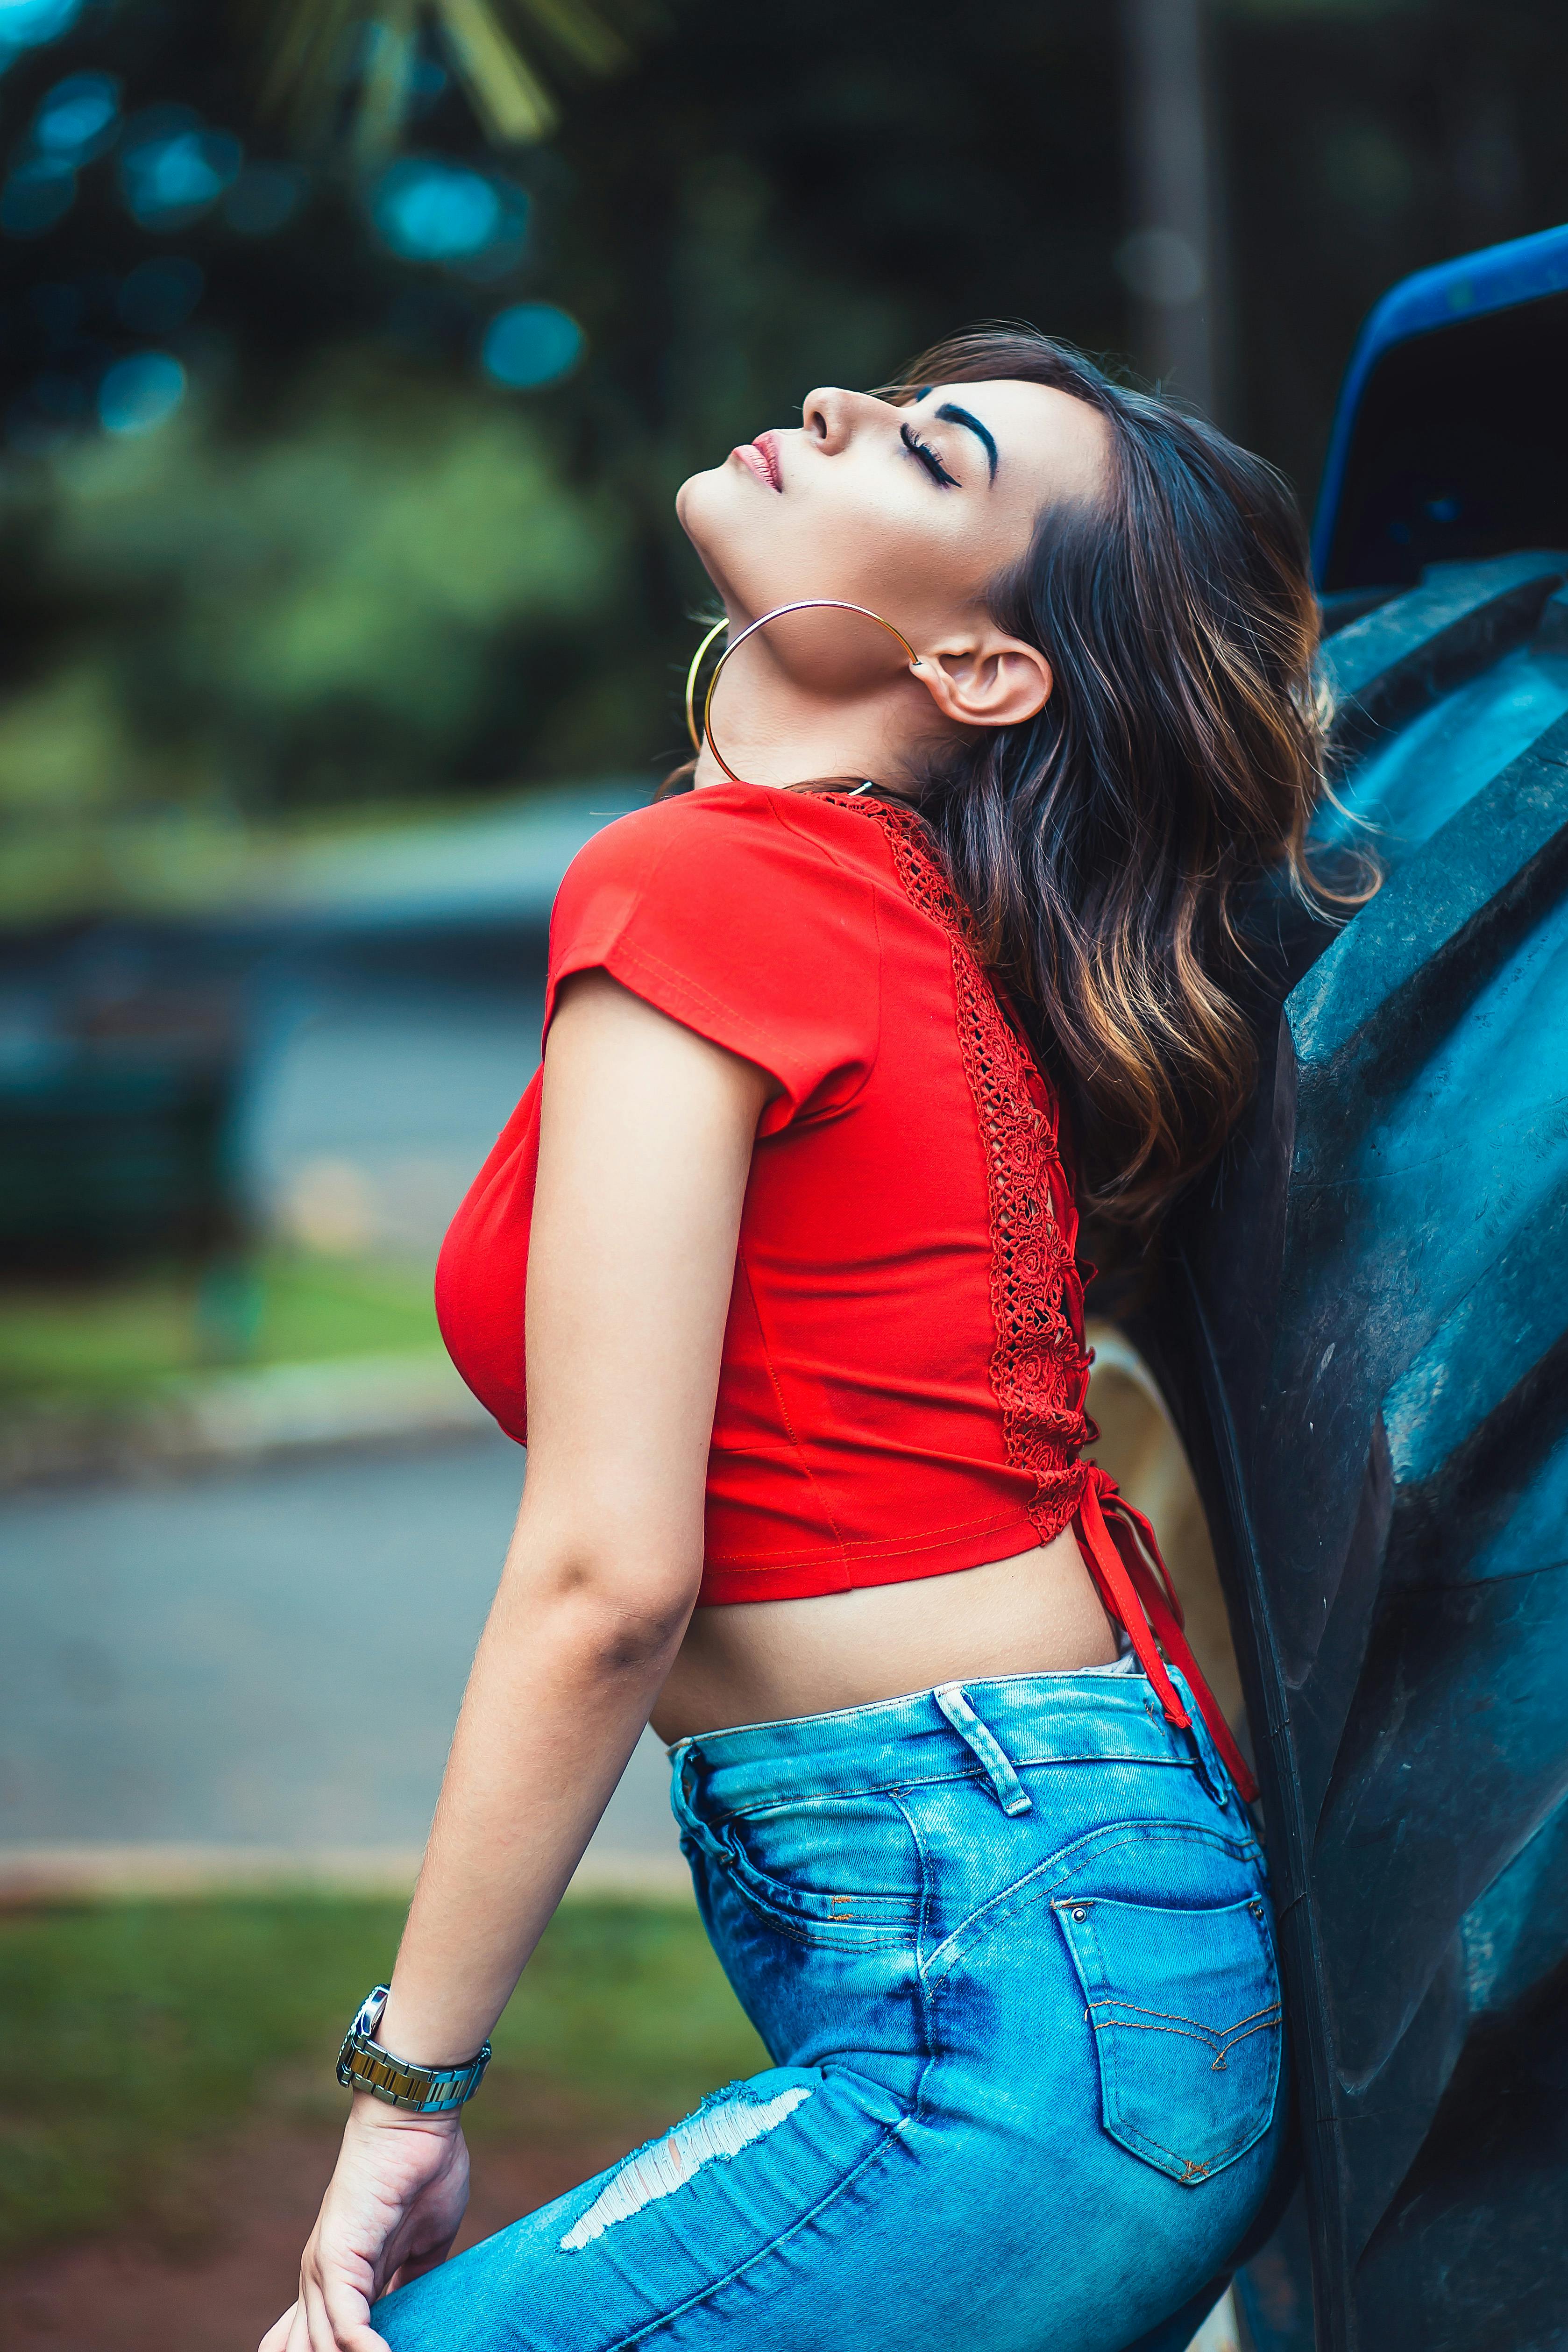 Woman With Red Skirt and Blue Denim Jeans · Free Stock Photo